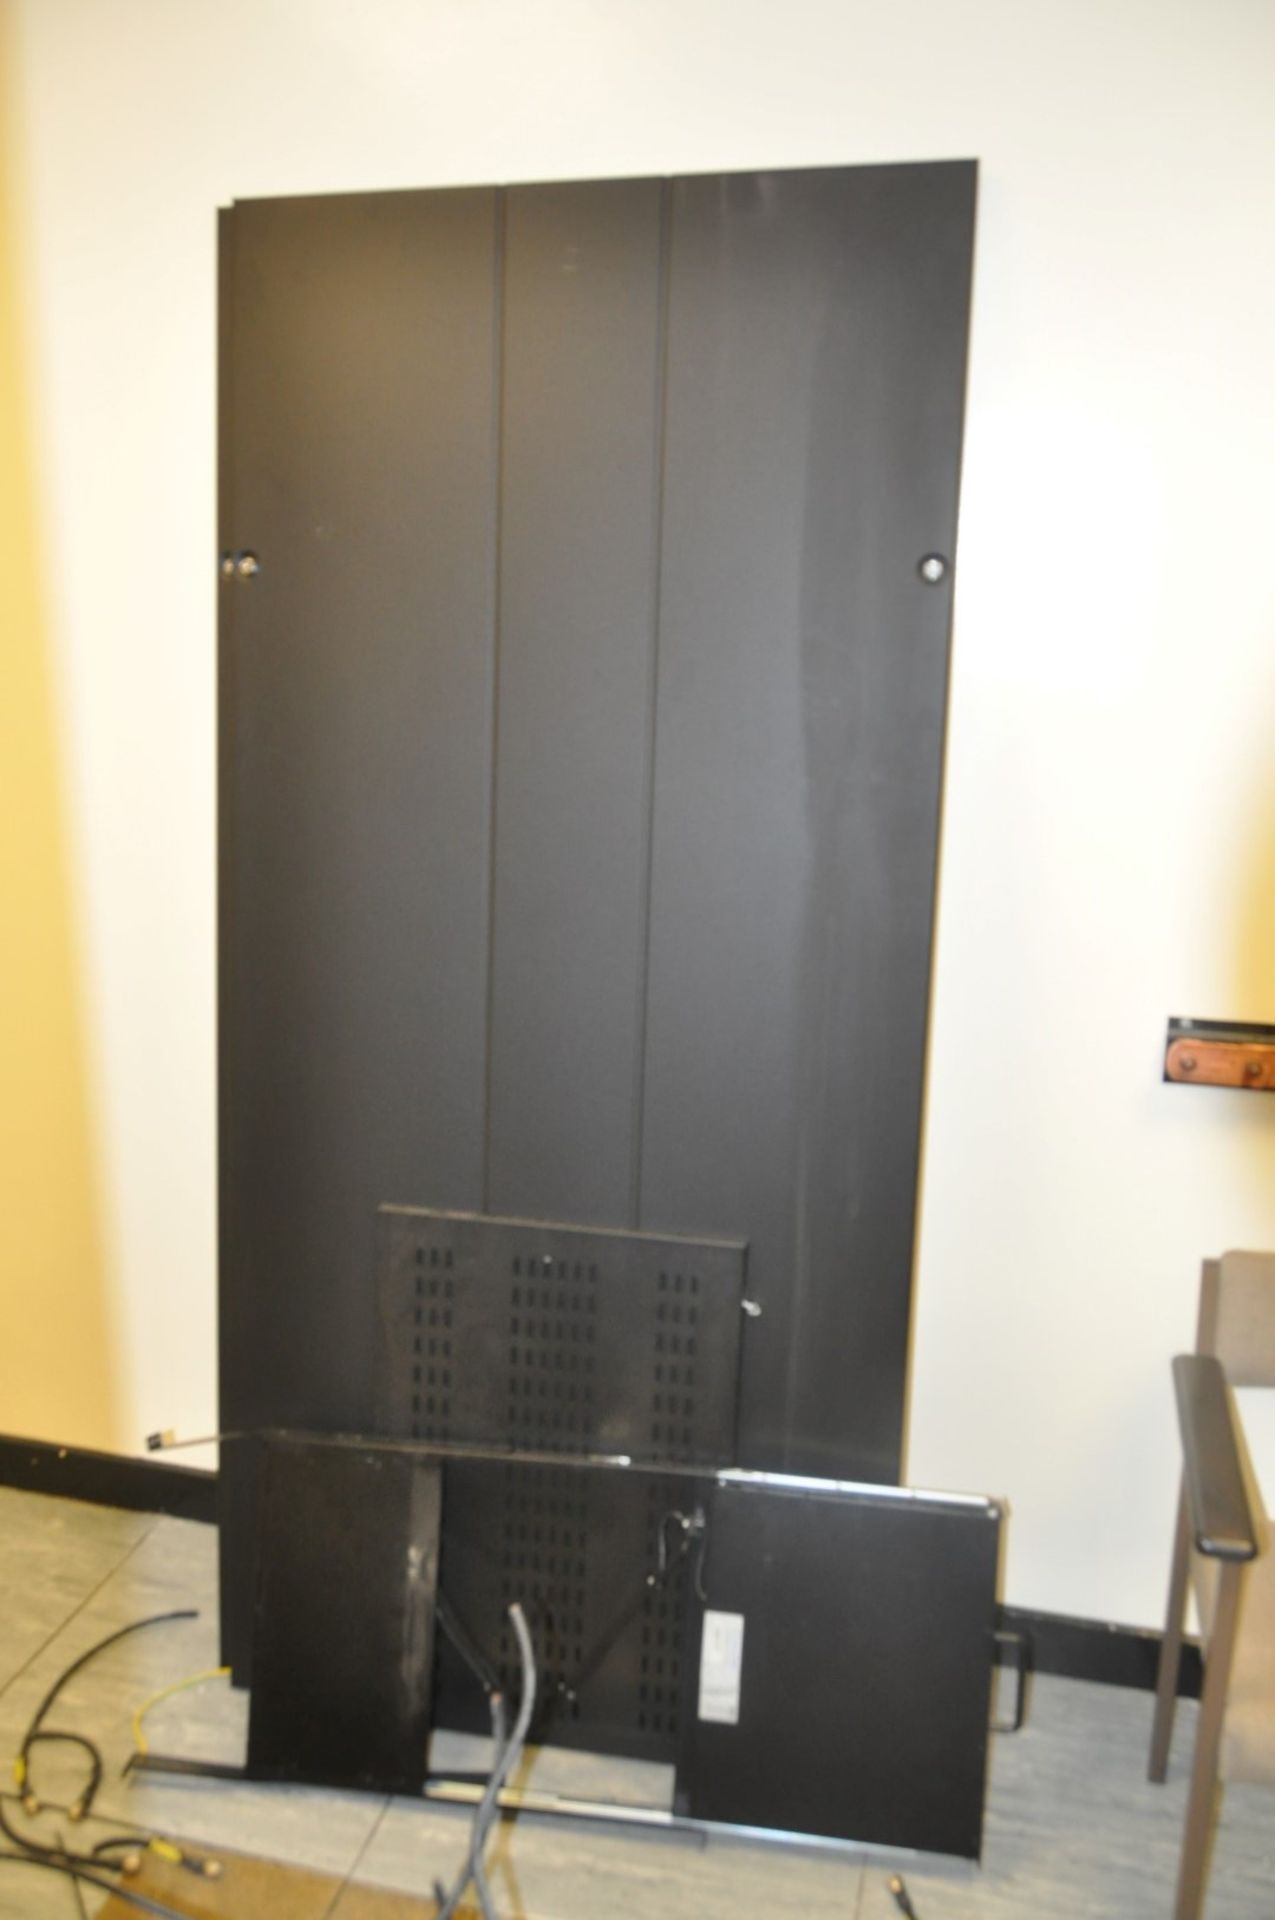 3 x Black Server Cabinet Enclosures - Includes Accessories Such as PSU Units, Plug Extensions, - Image 3 of 12